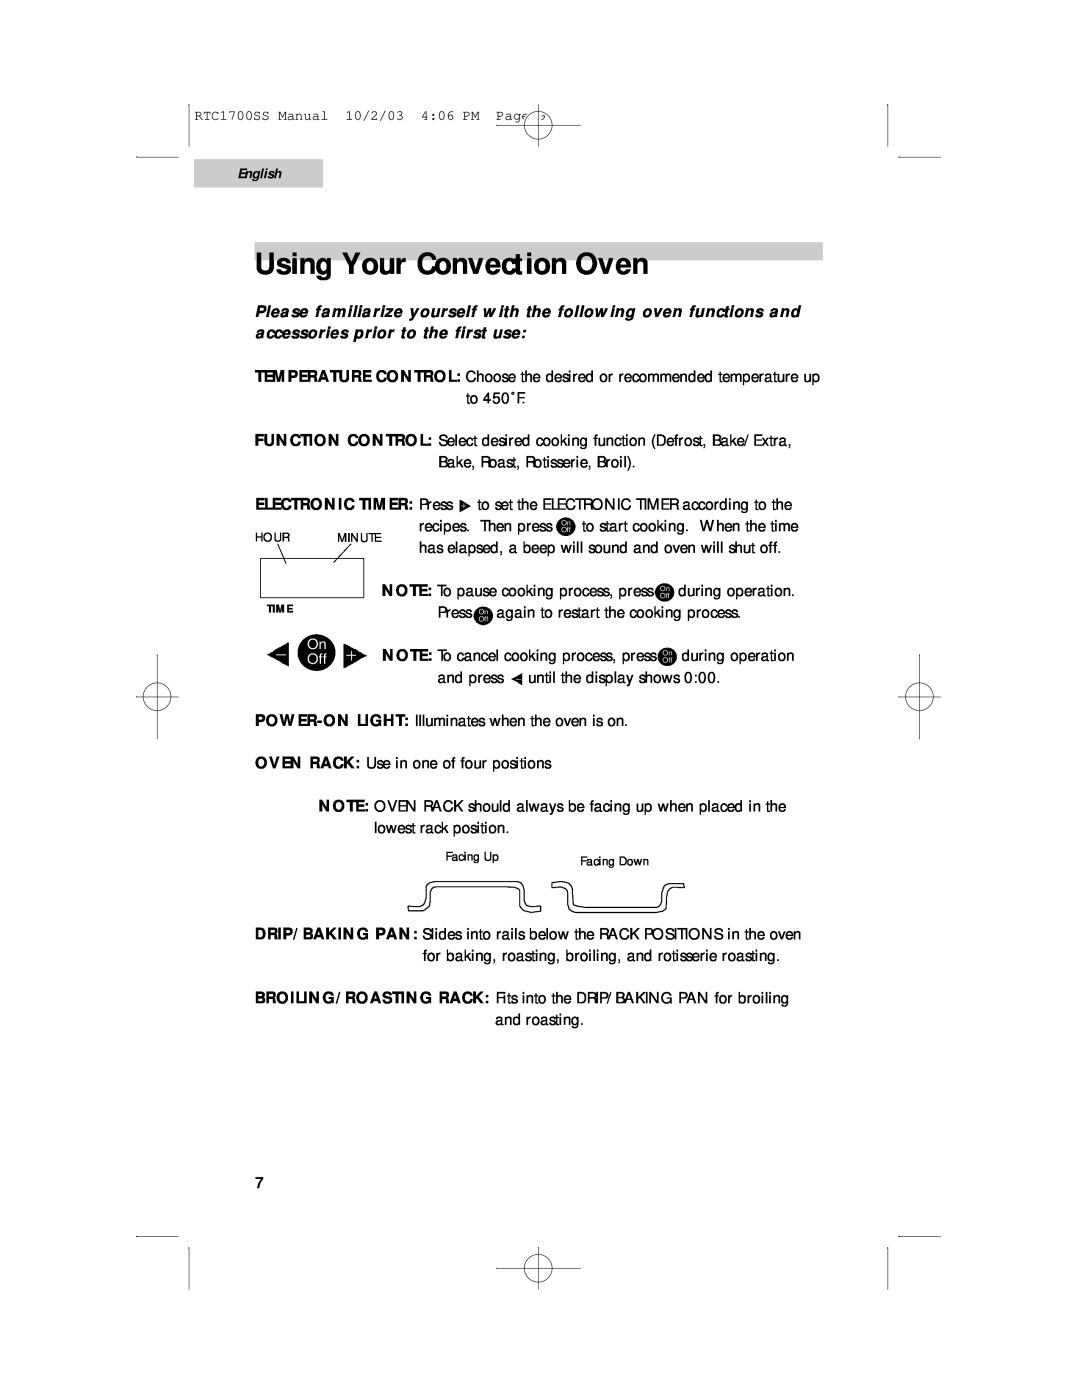 Haier RTC1700SS user manual Using Your Convection Oven, English 